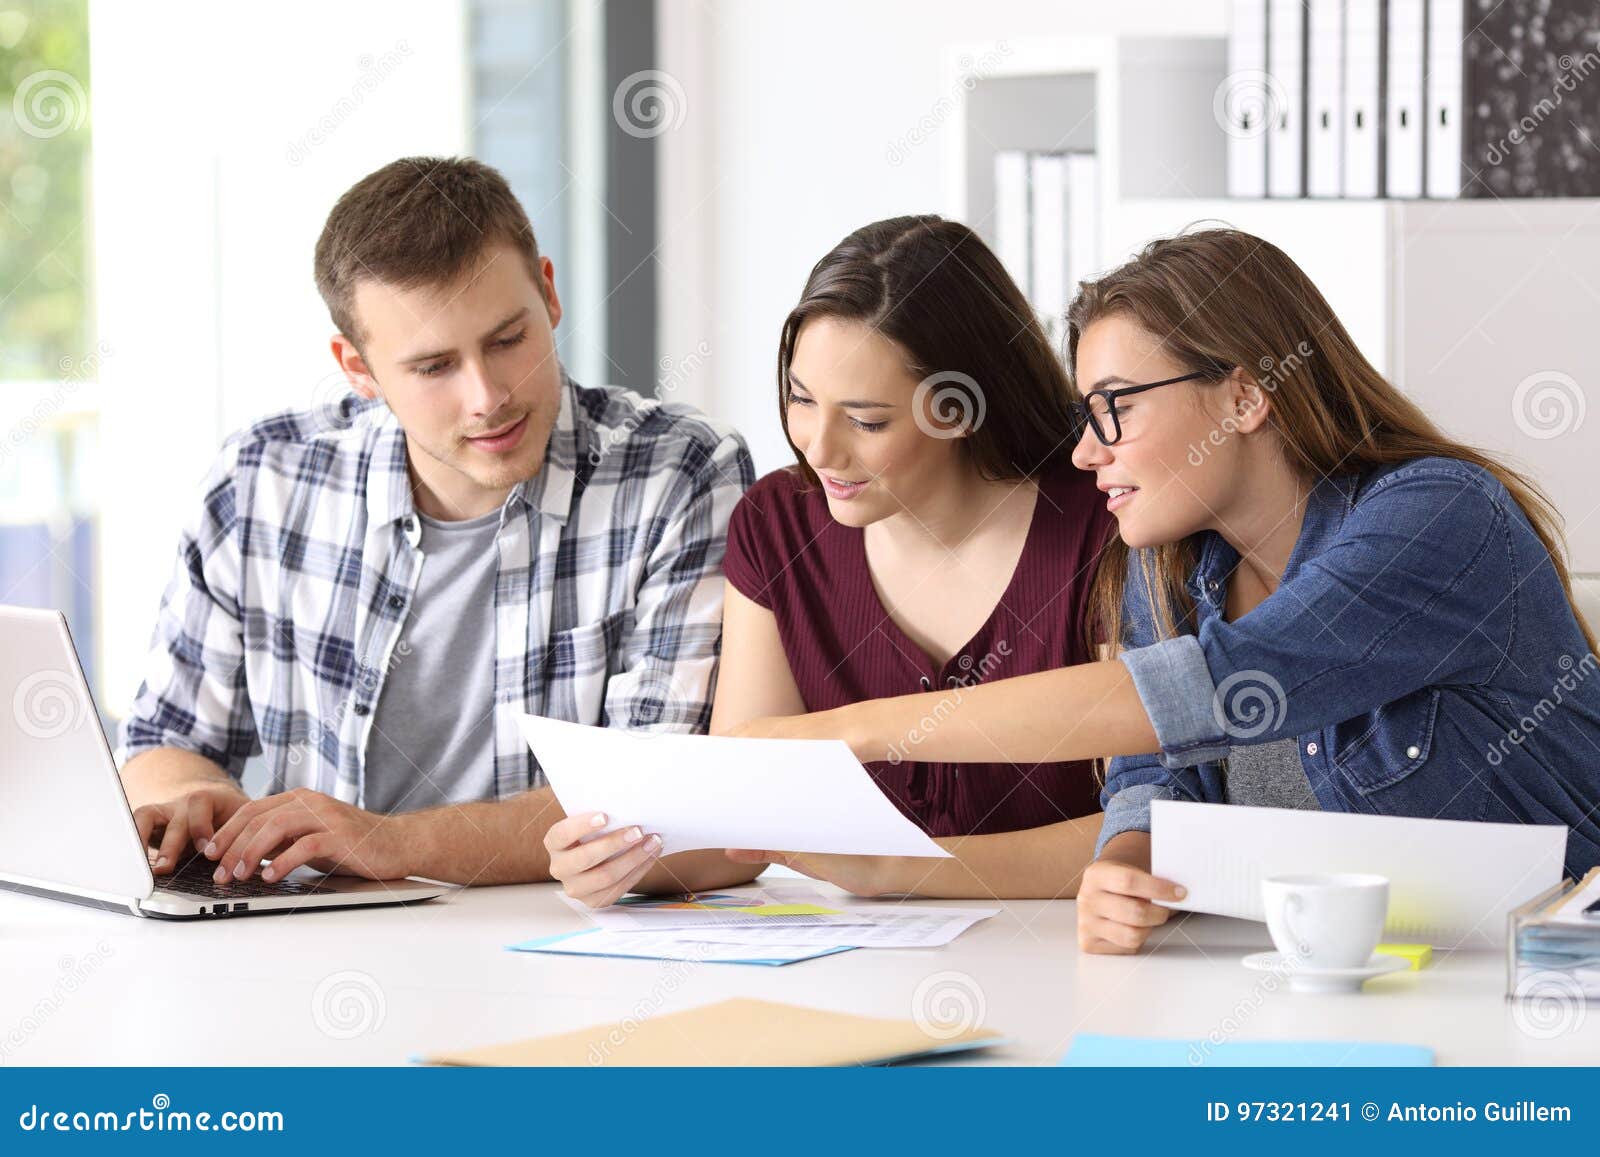 entrepreneurs analyzing a report at office